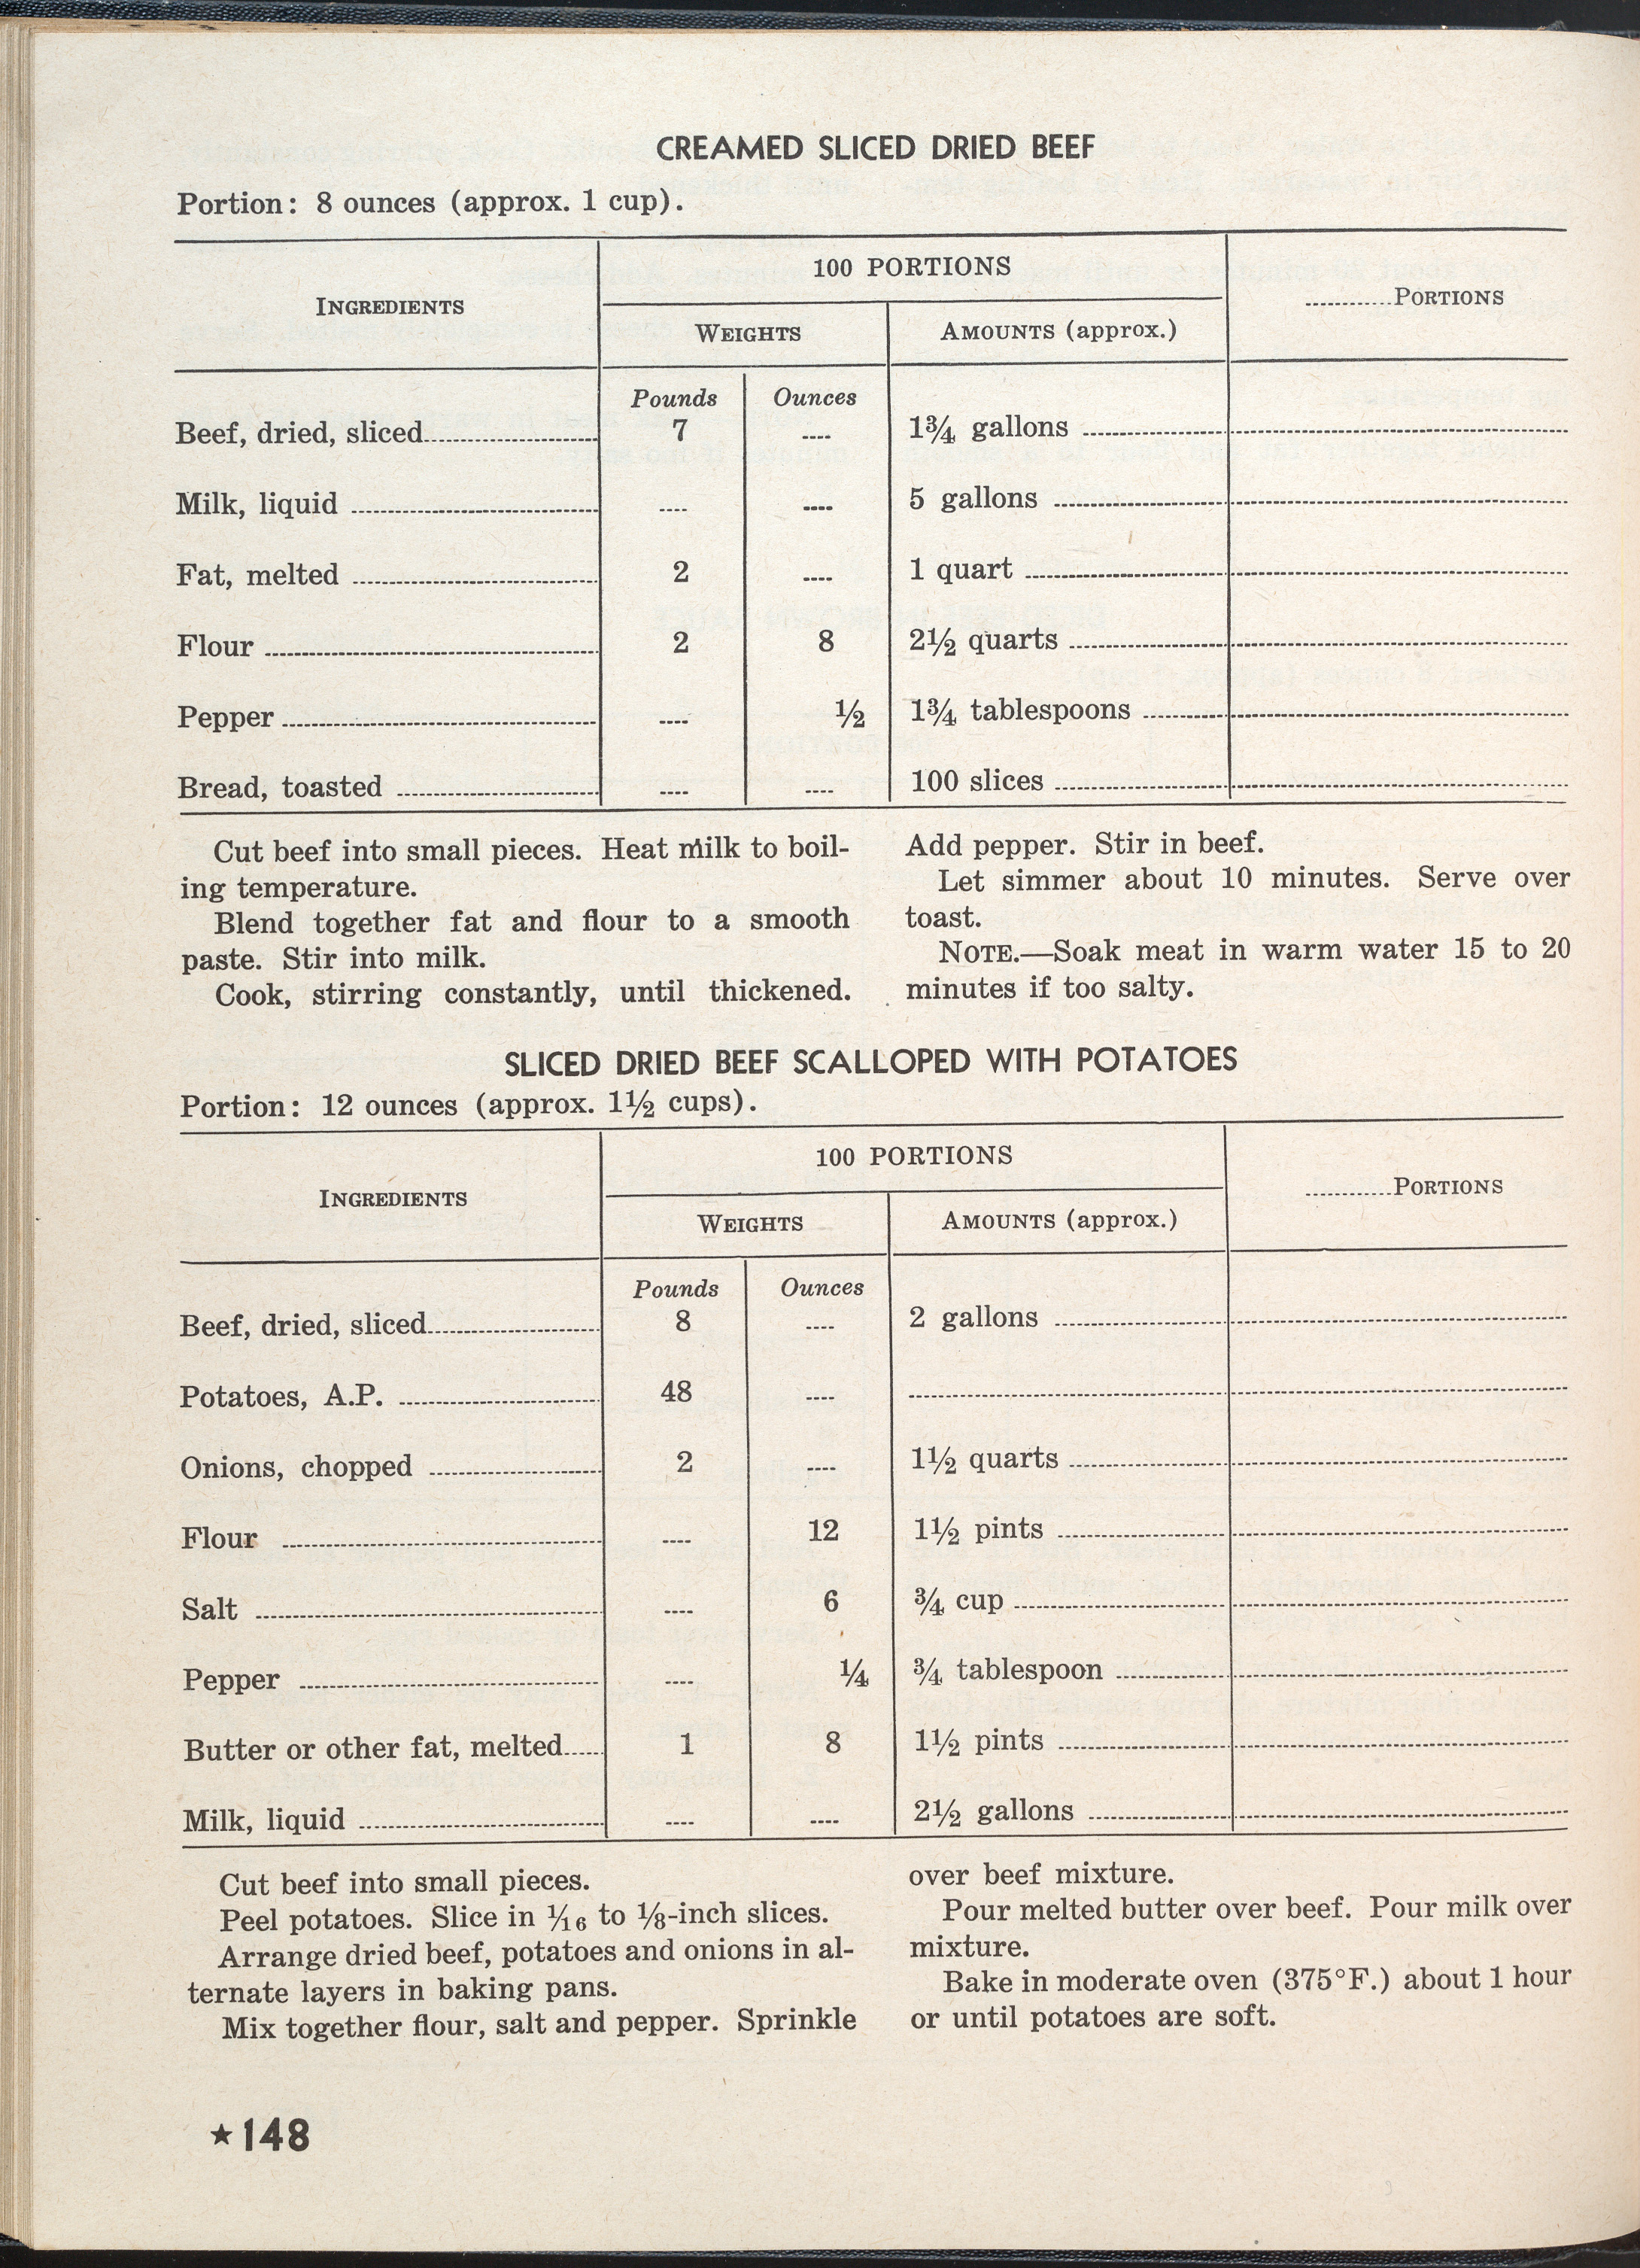 p 148 "Creamed Sliced Dried Beef" from The Cook Book of the U.S. Navy.